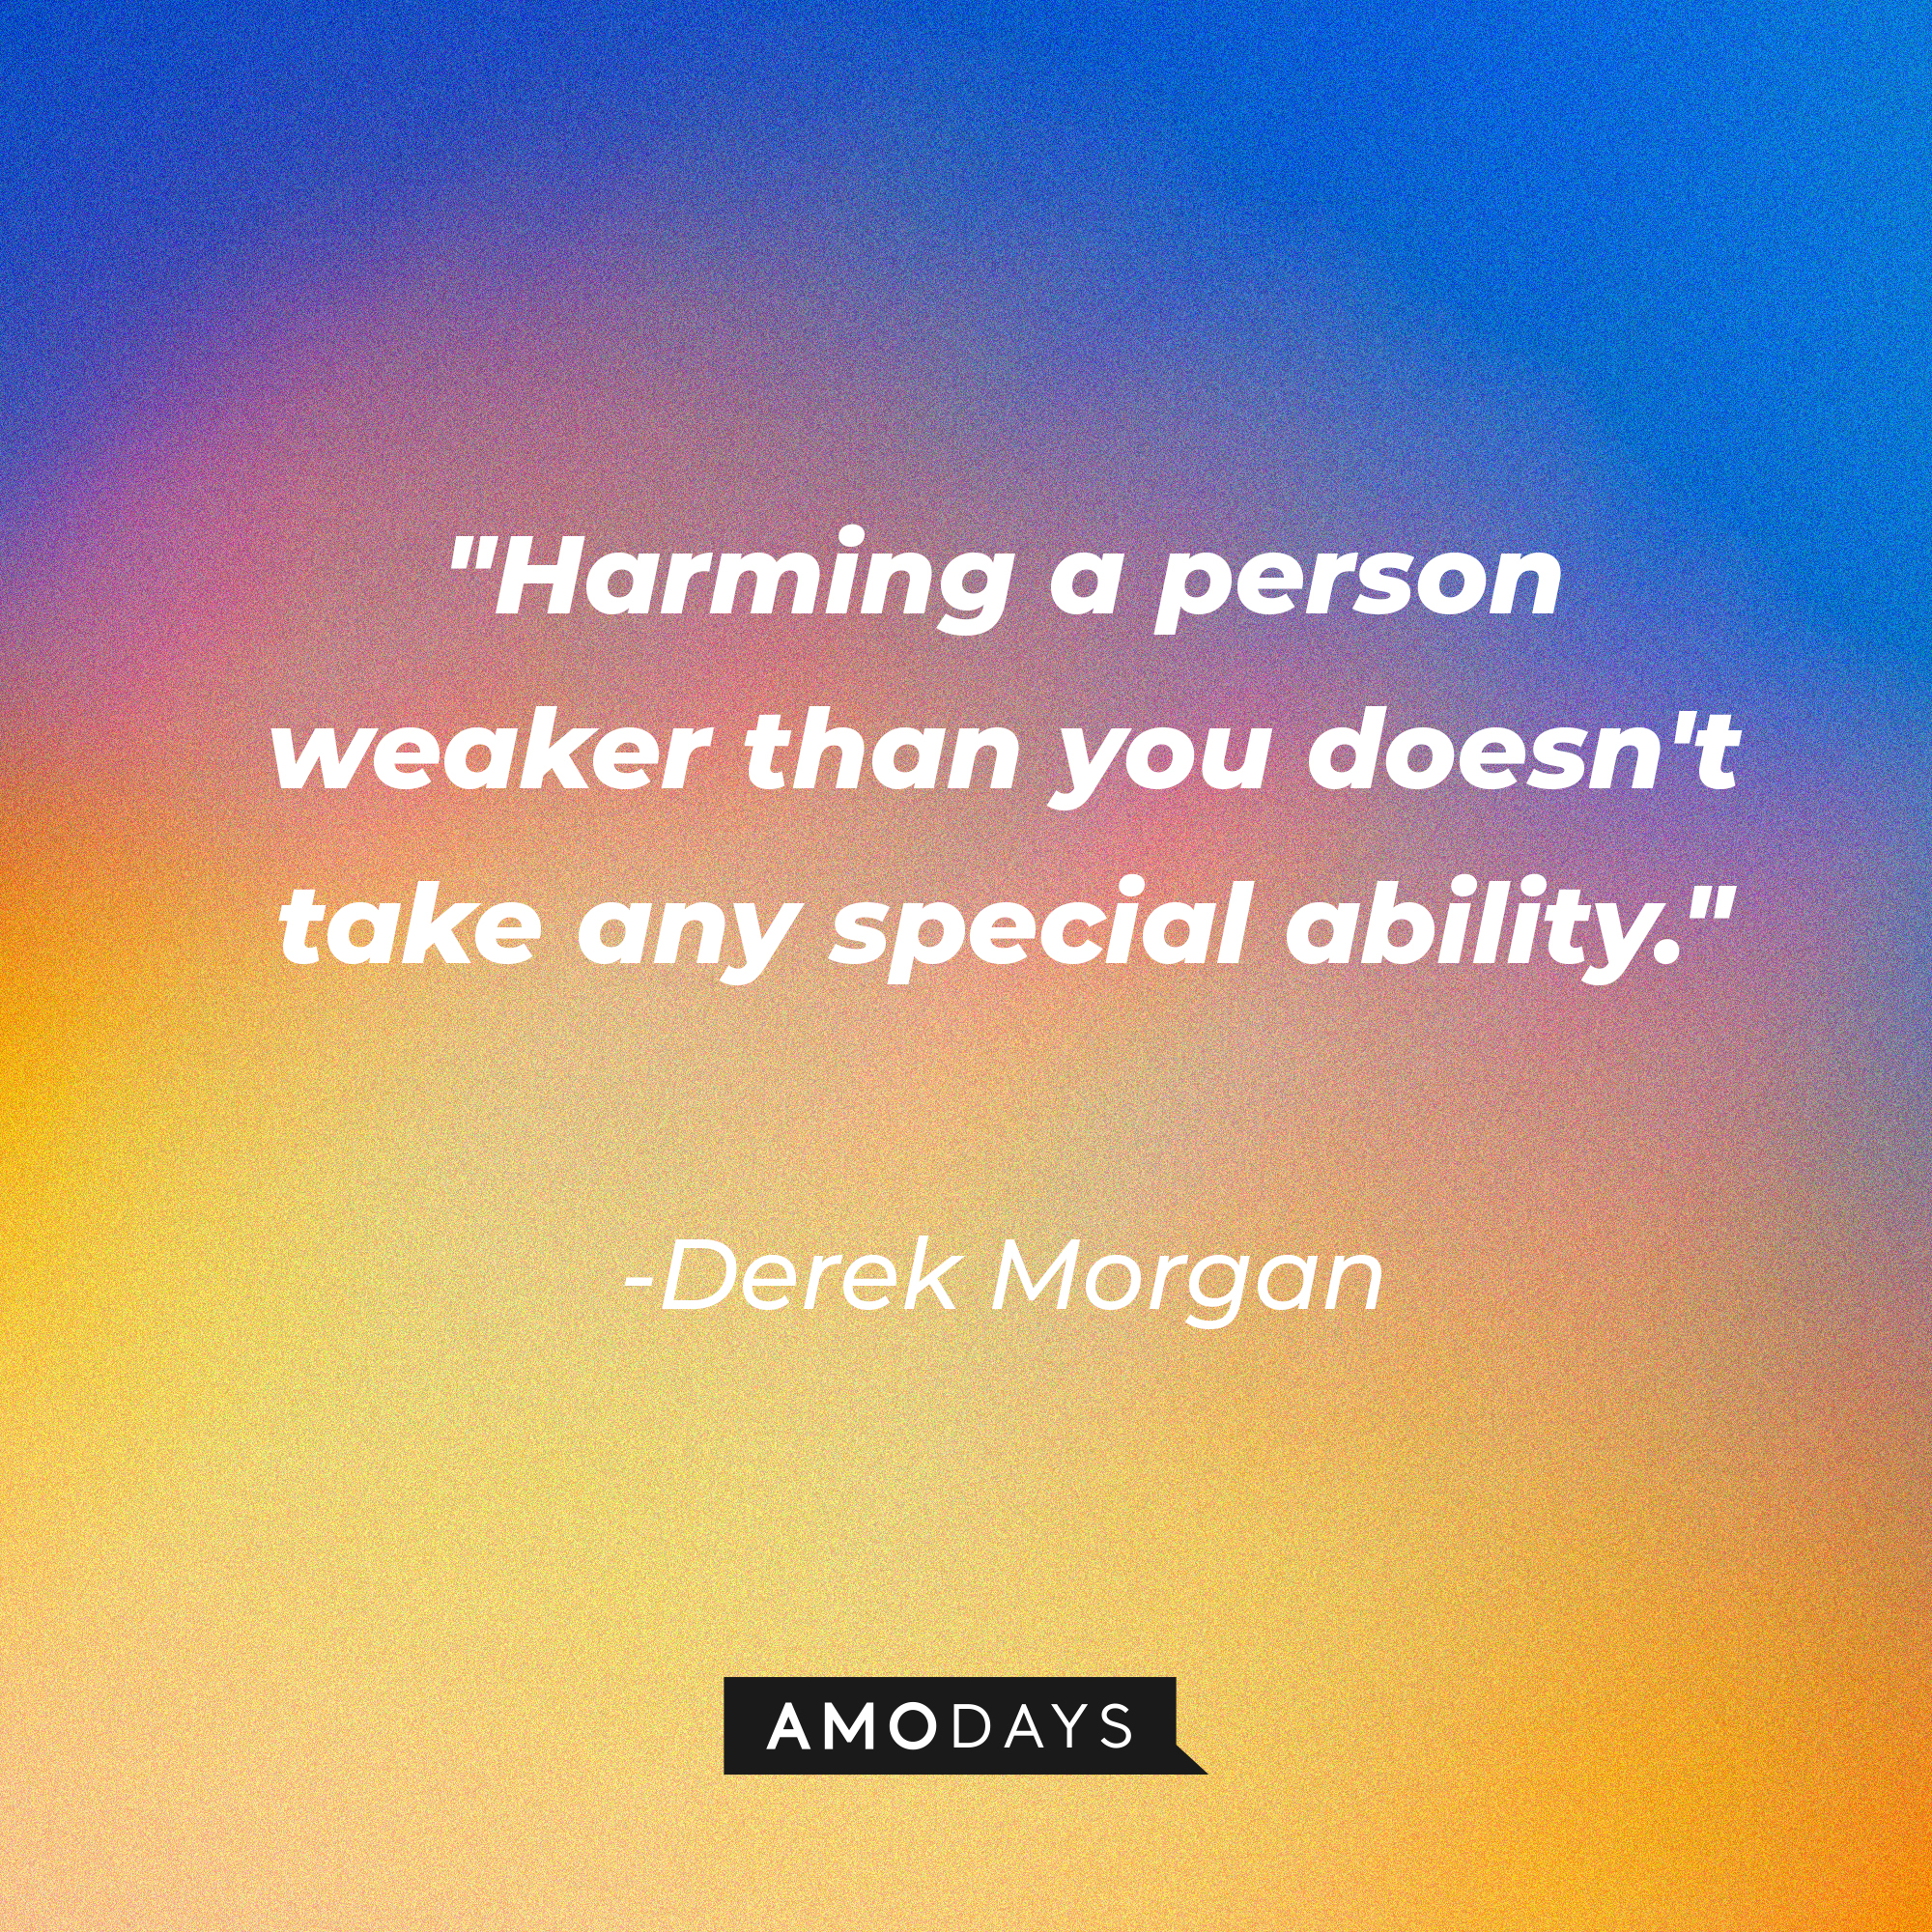 Derek Morgan's quote: "Harming a person weaker than you doesn't take any special ability." | Source: AmoDays